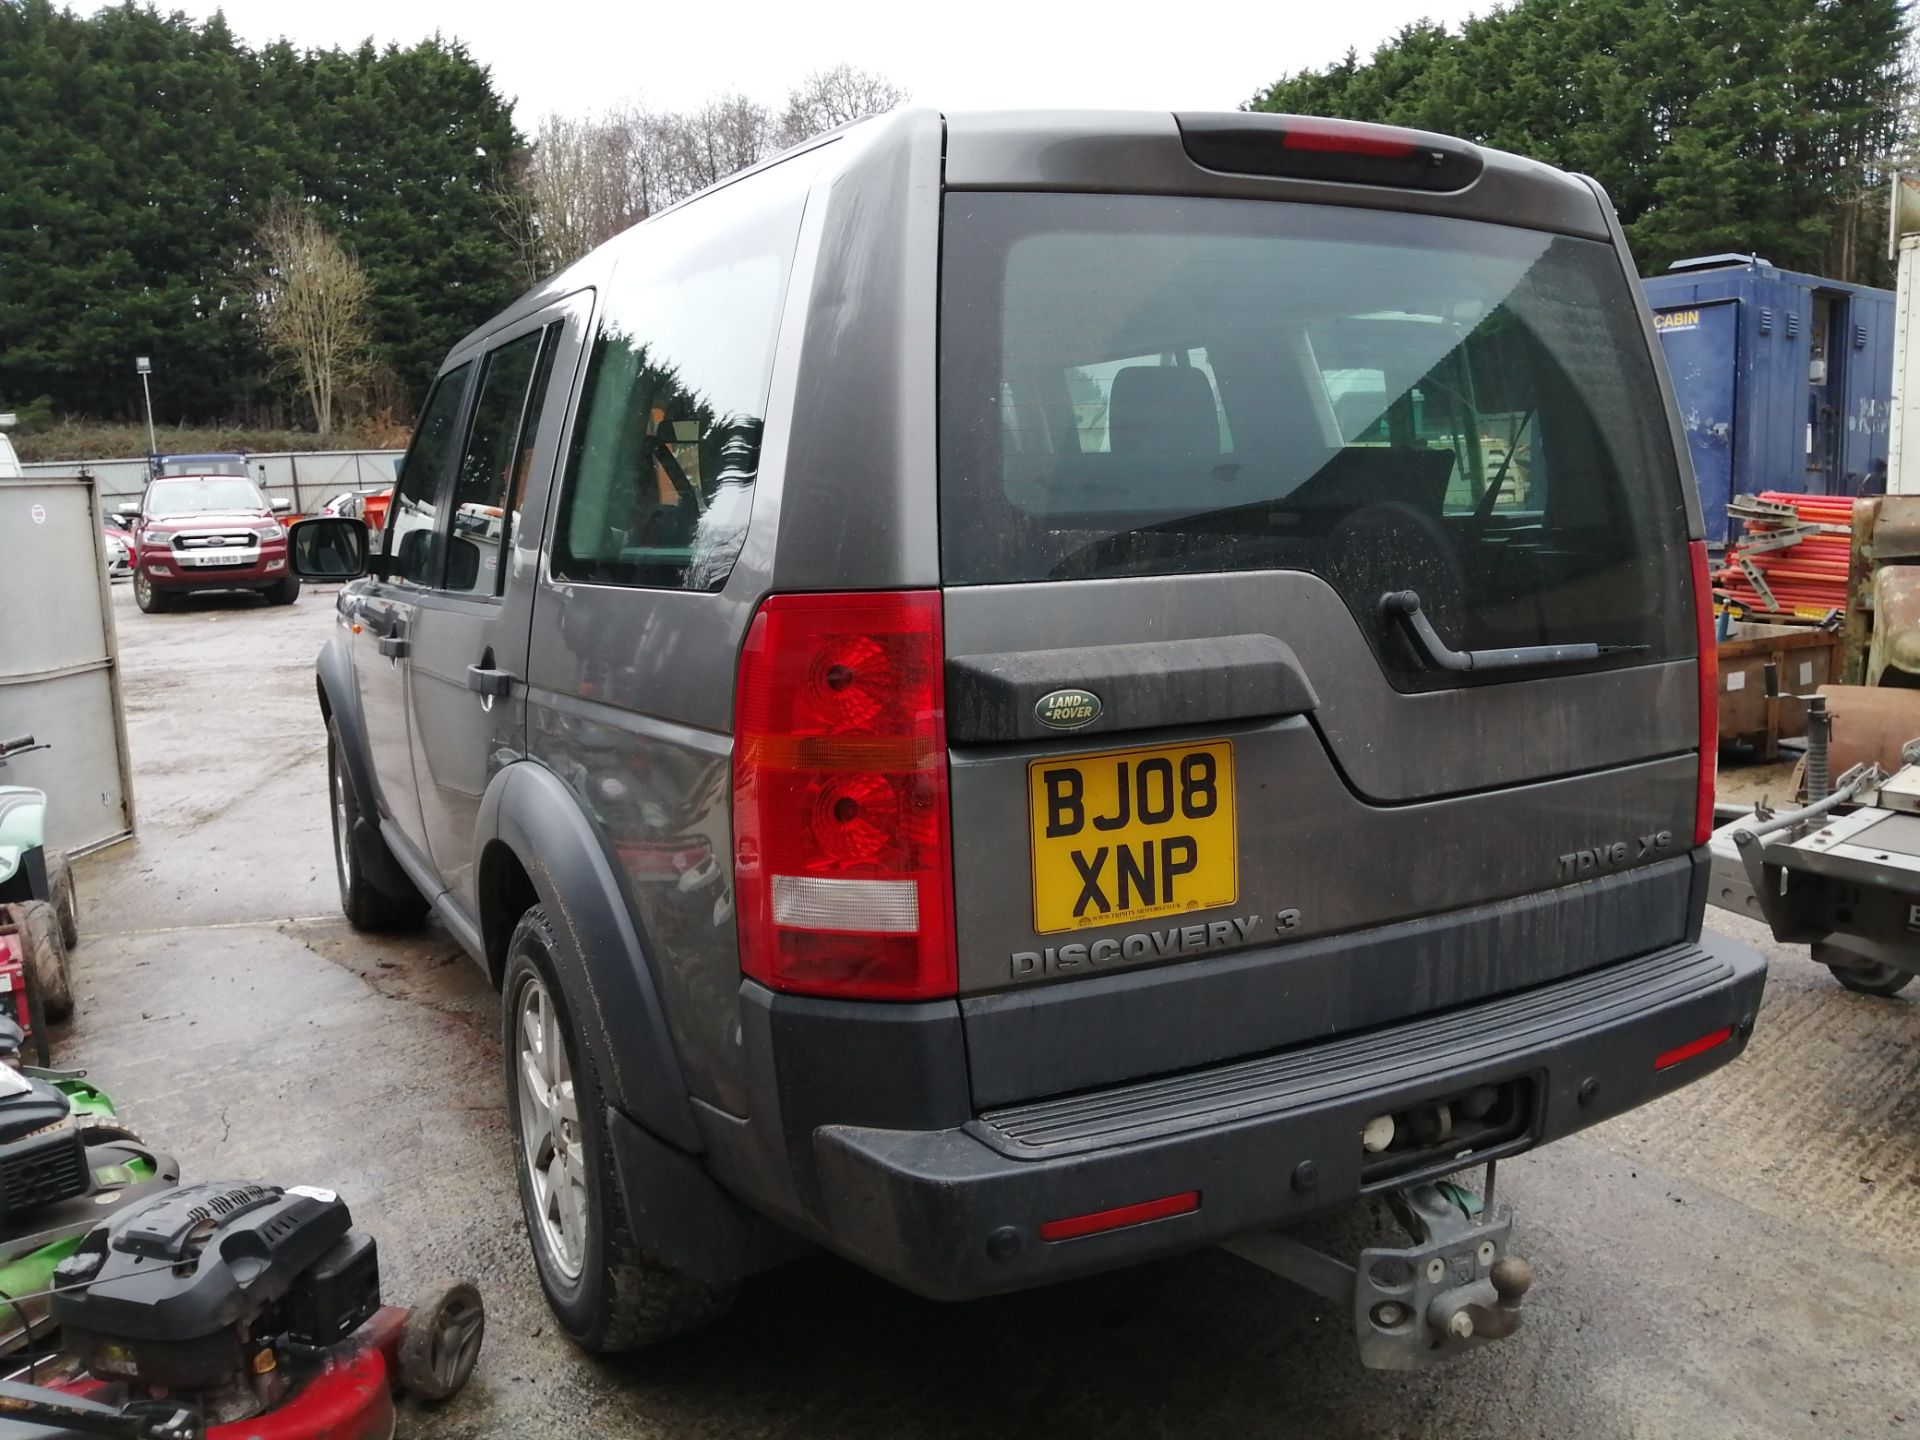 08/08 LAND ROVER DISCOVERY TDV6 XS - 2720cc 5dr Estate (Grey, 187k) - Image 6 of 11